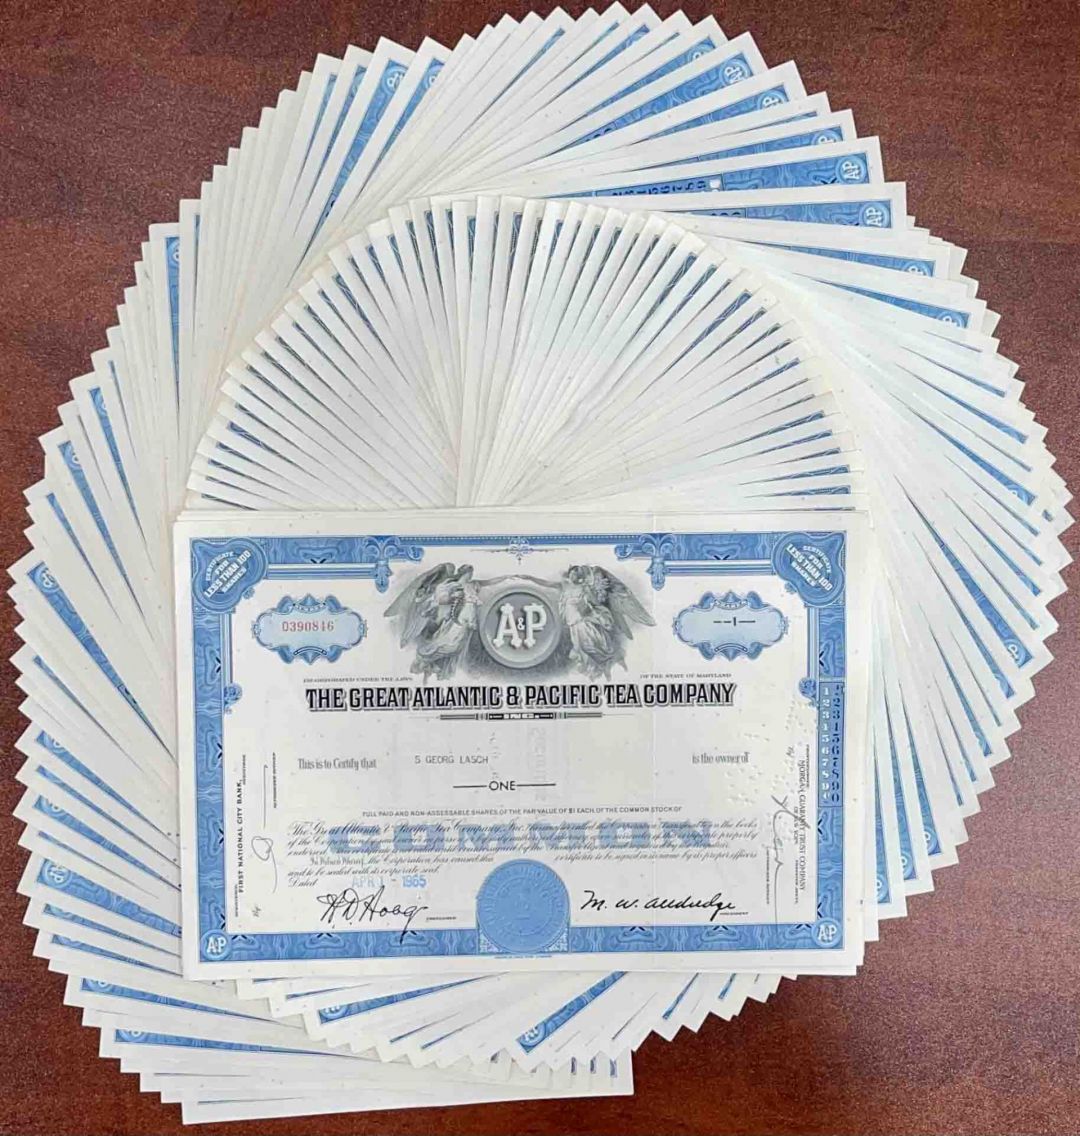 100 Pieces of Great Atlantic and Pacific Tea Co. - A&P - 100 Stock Certificates dated 1960's-70's